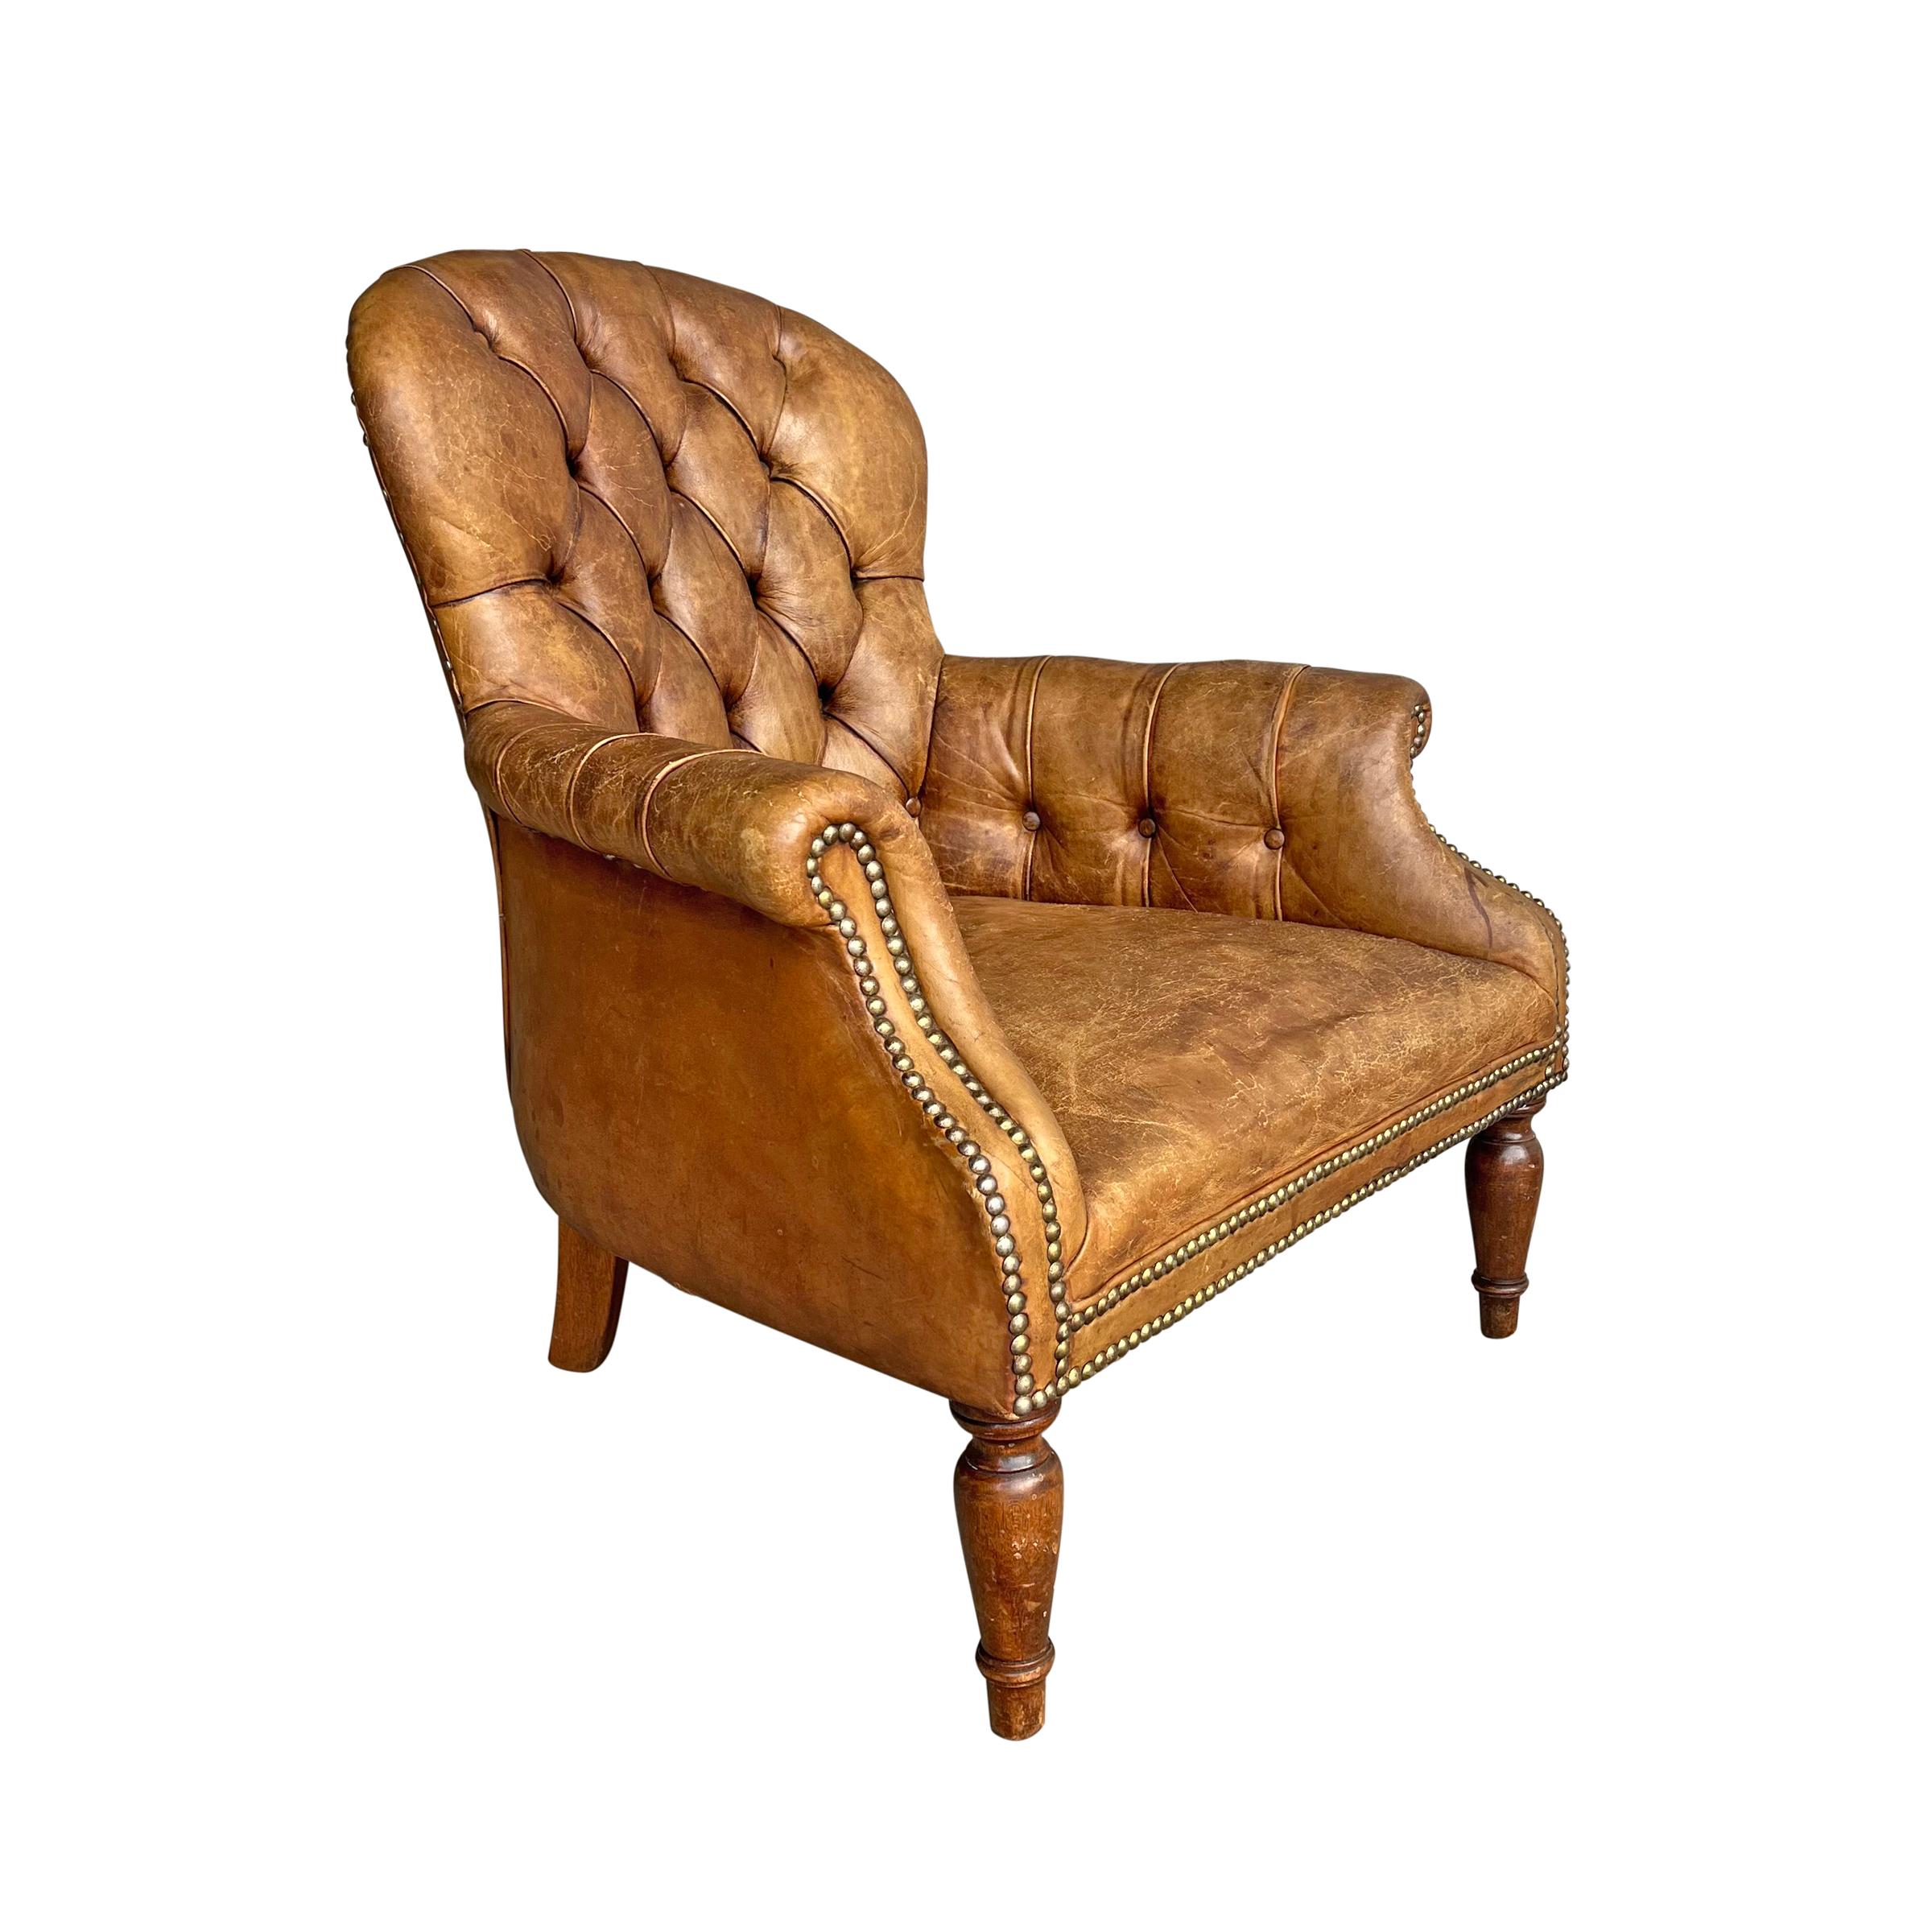 Leather Early 20th Century French Napoleon III-Style Chair